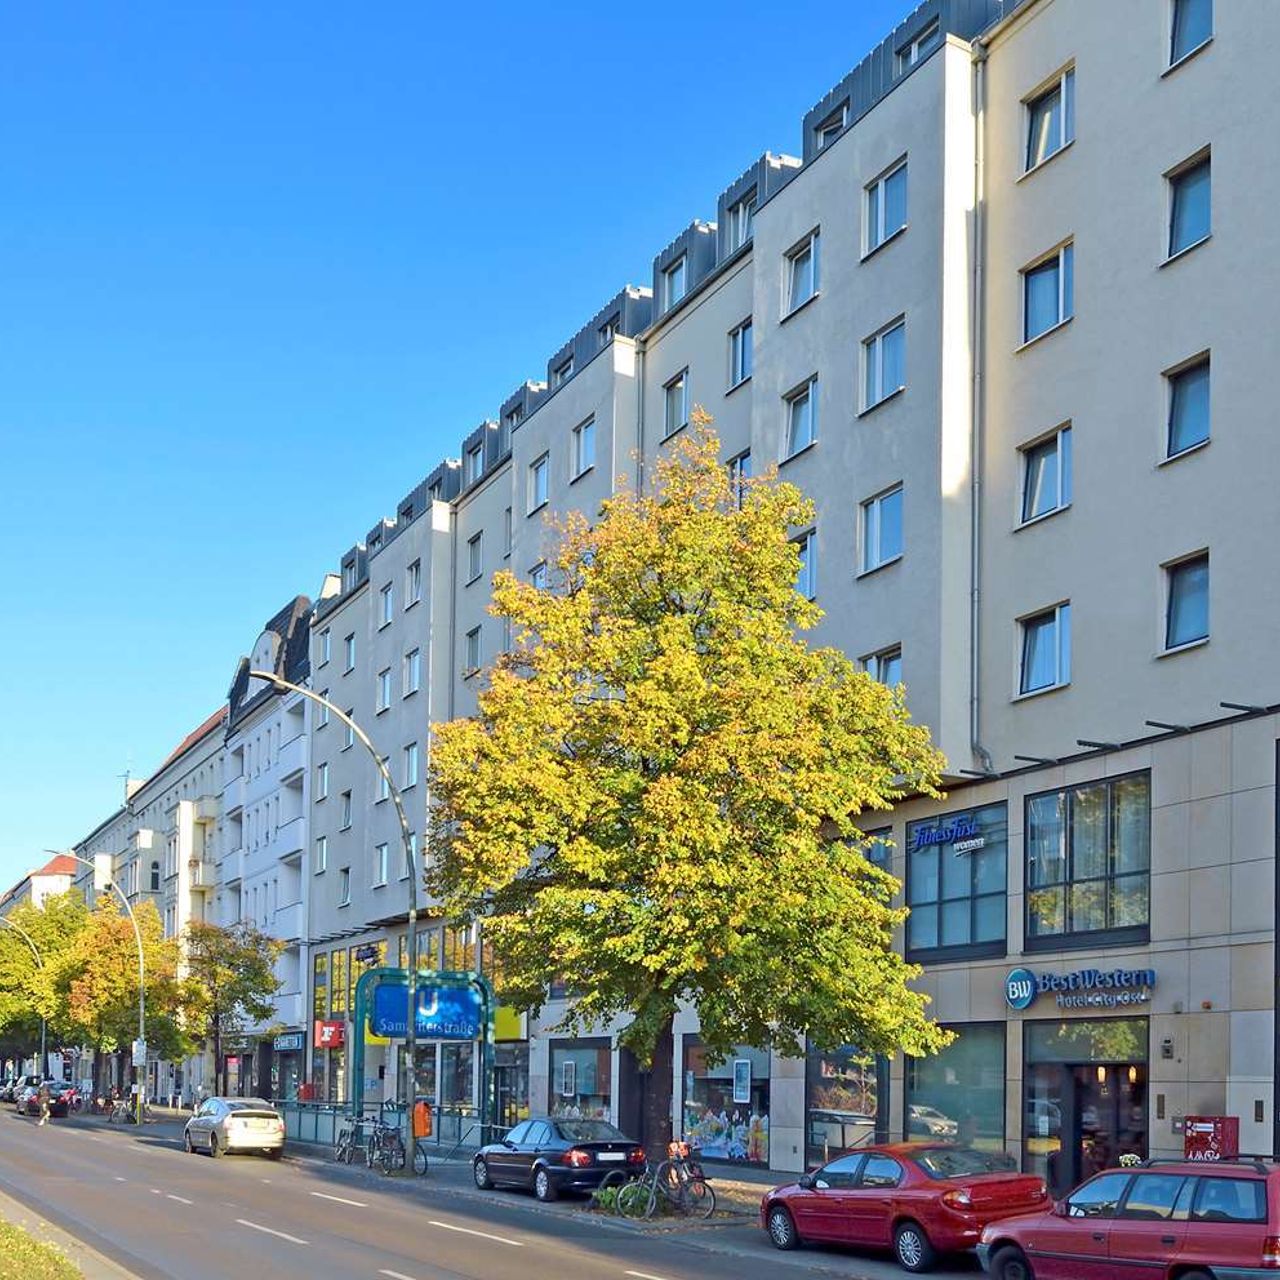 Hotel Best Western City Ost - Berlin - Great prices at HOTEL INFO